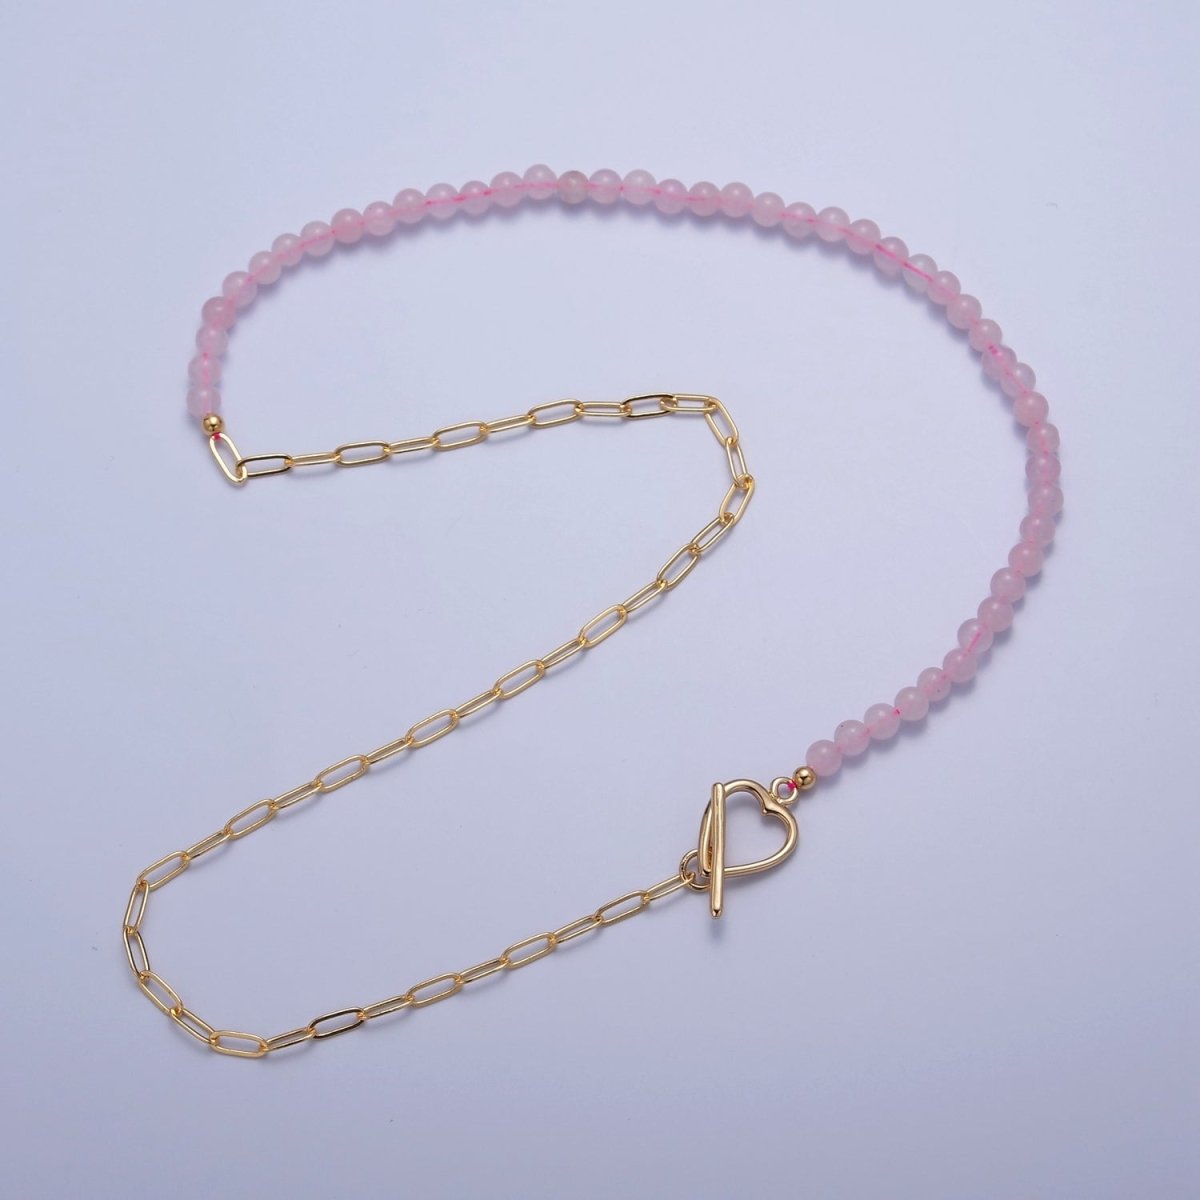 Dainty Half Bead Half Link Chain Necklace, 24k Gold Filled Paperclip Chain with Pink Quartz Necklace Heart Toggle Clasp | WA-969 Clearance Pricing - DLUXCA